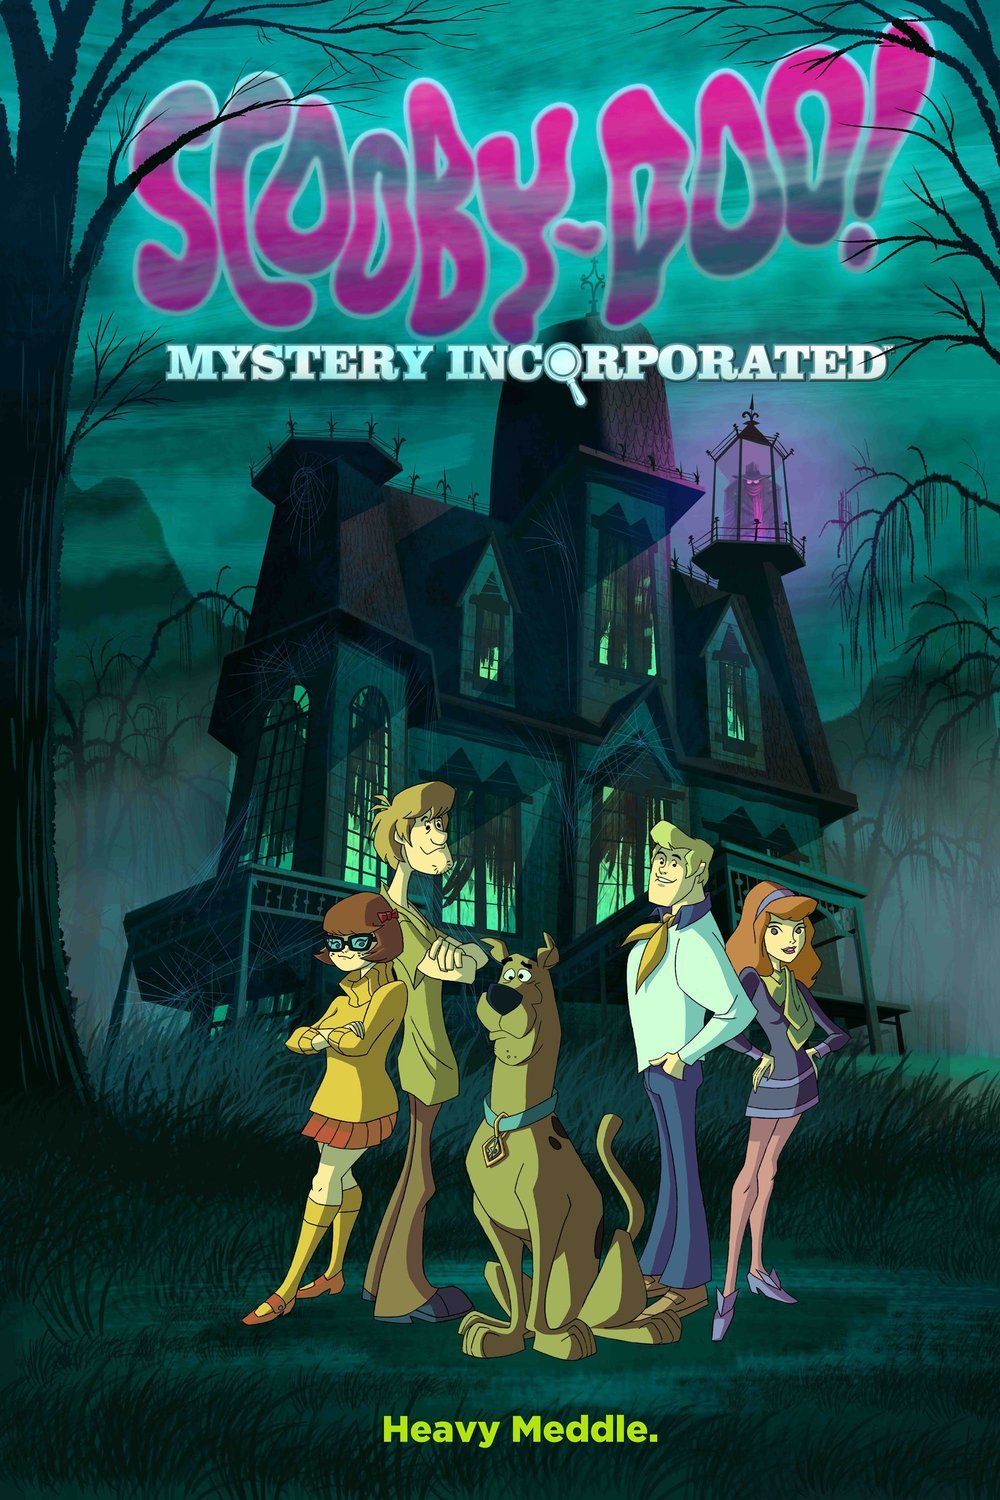 Poster of the movie Scooby-Doo! Mystery Incorporated